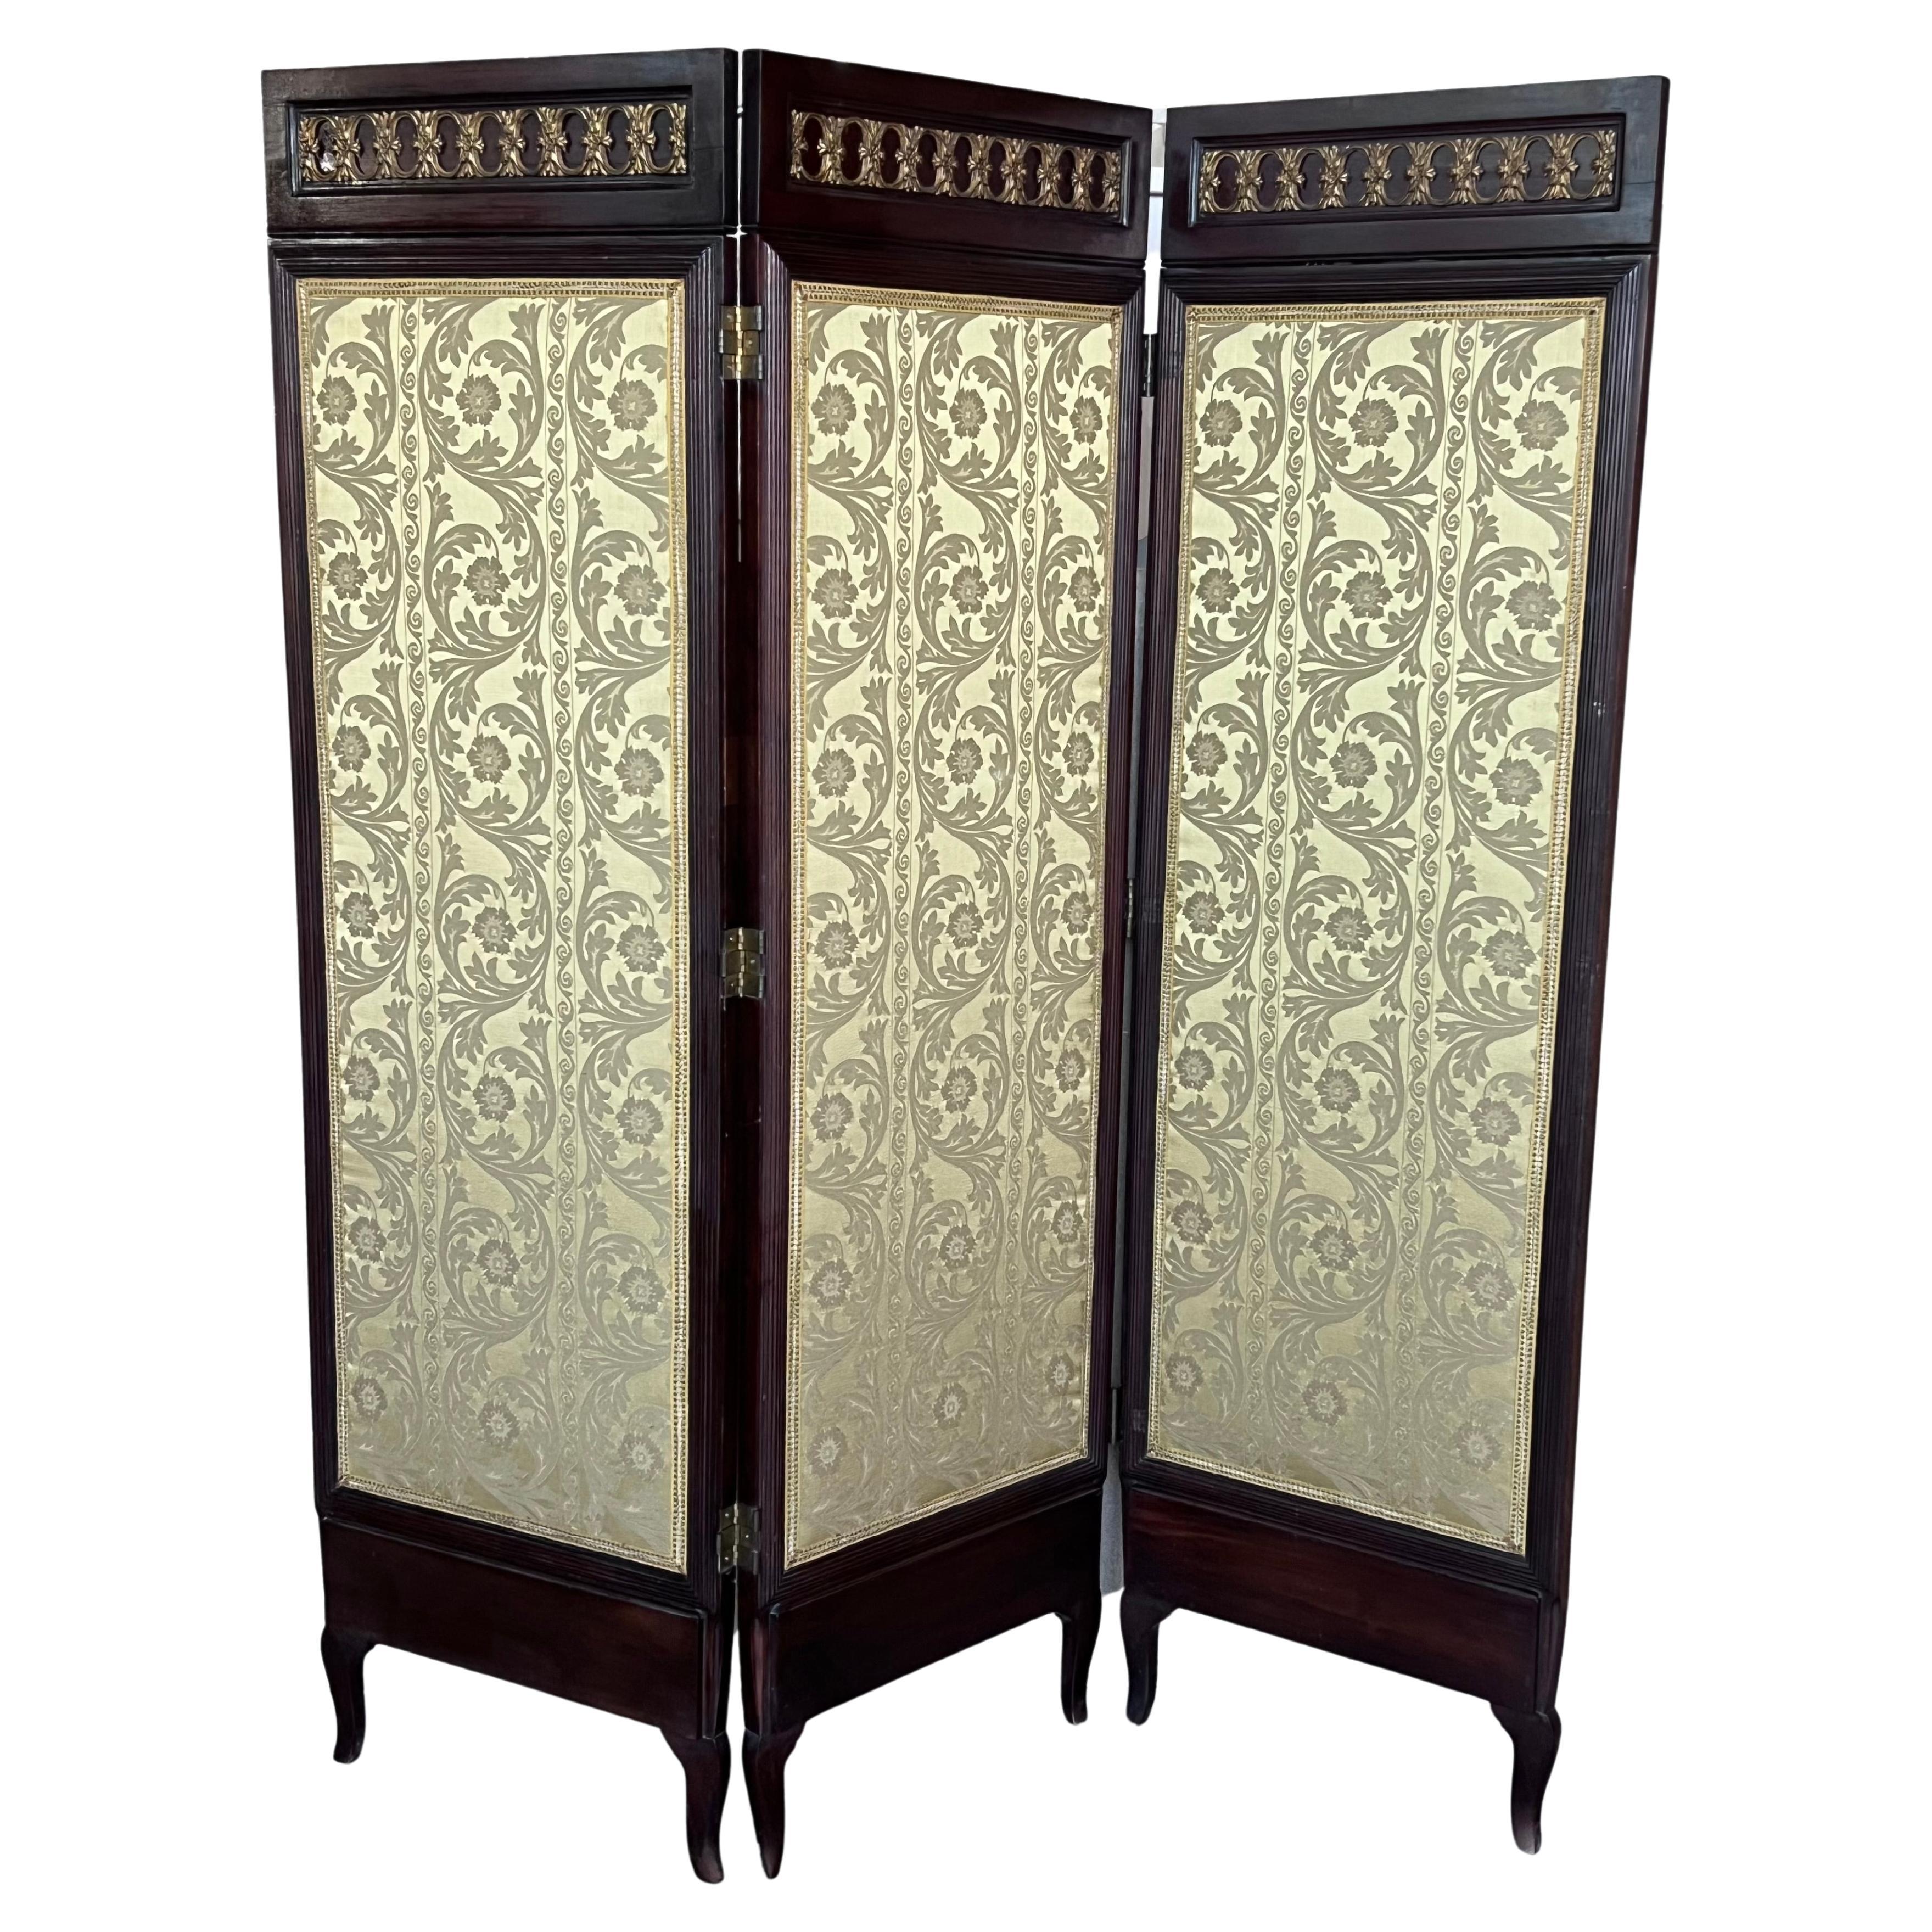 French Empire Mahogany 3-Fold Screen with Bronze Mounts For Sale